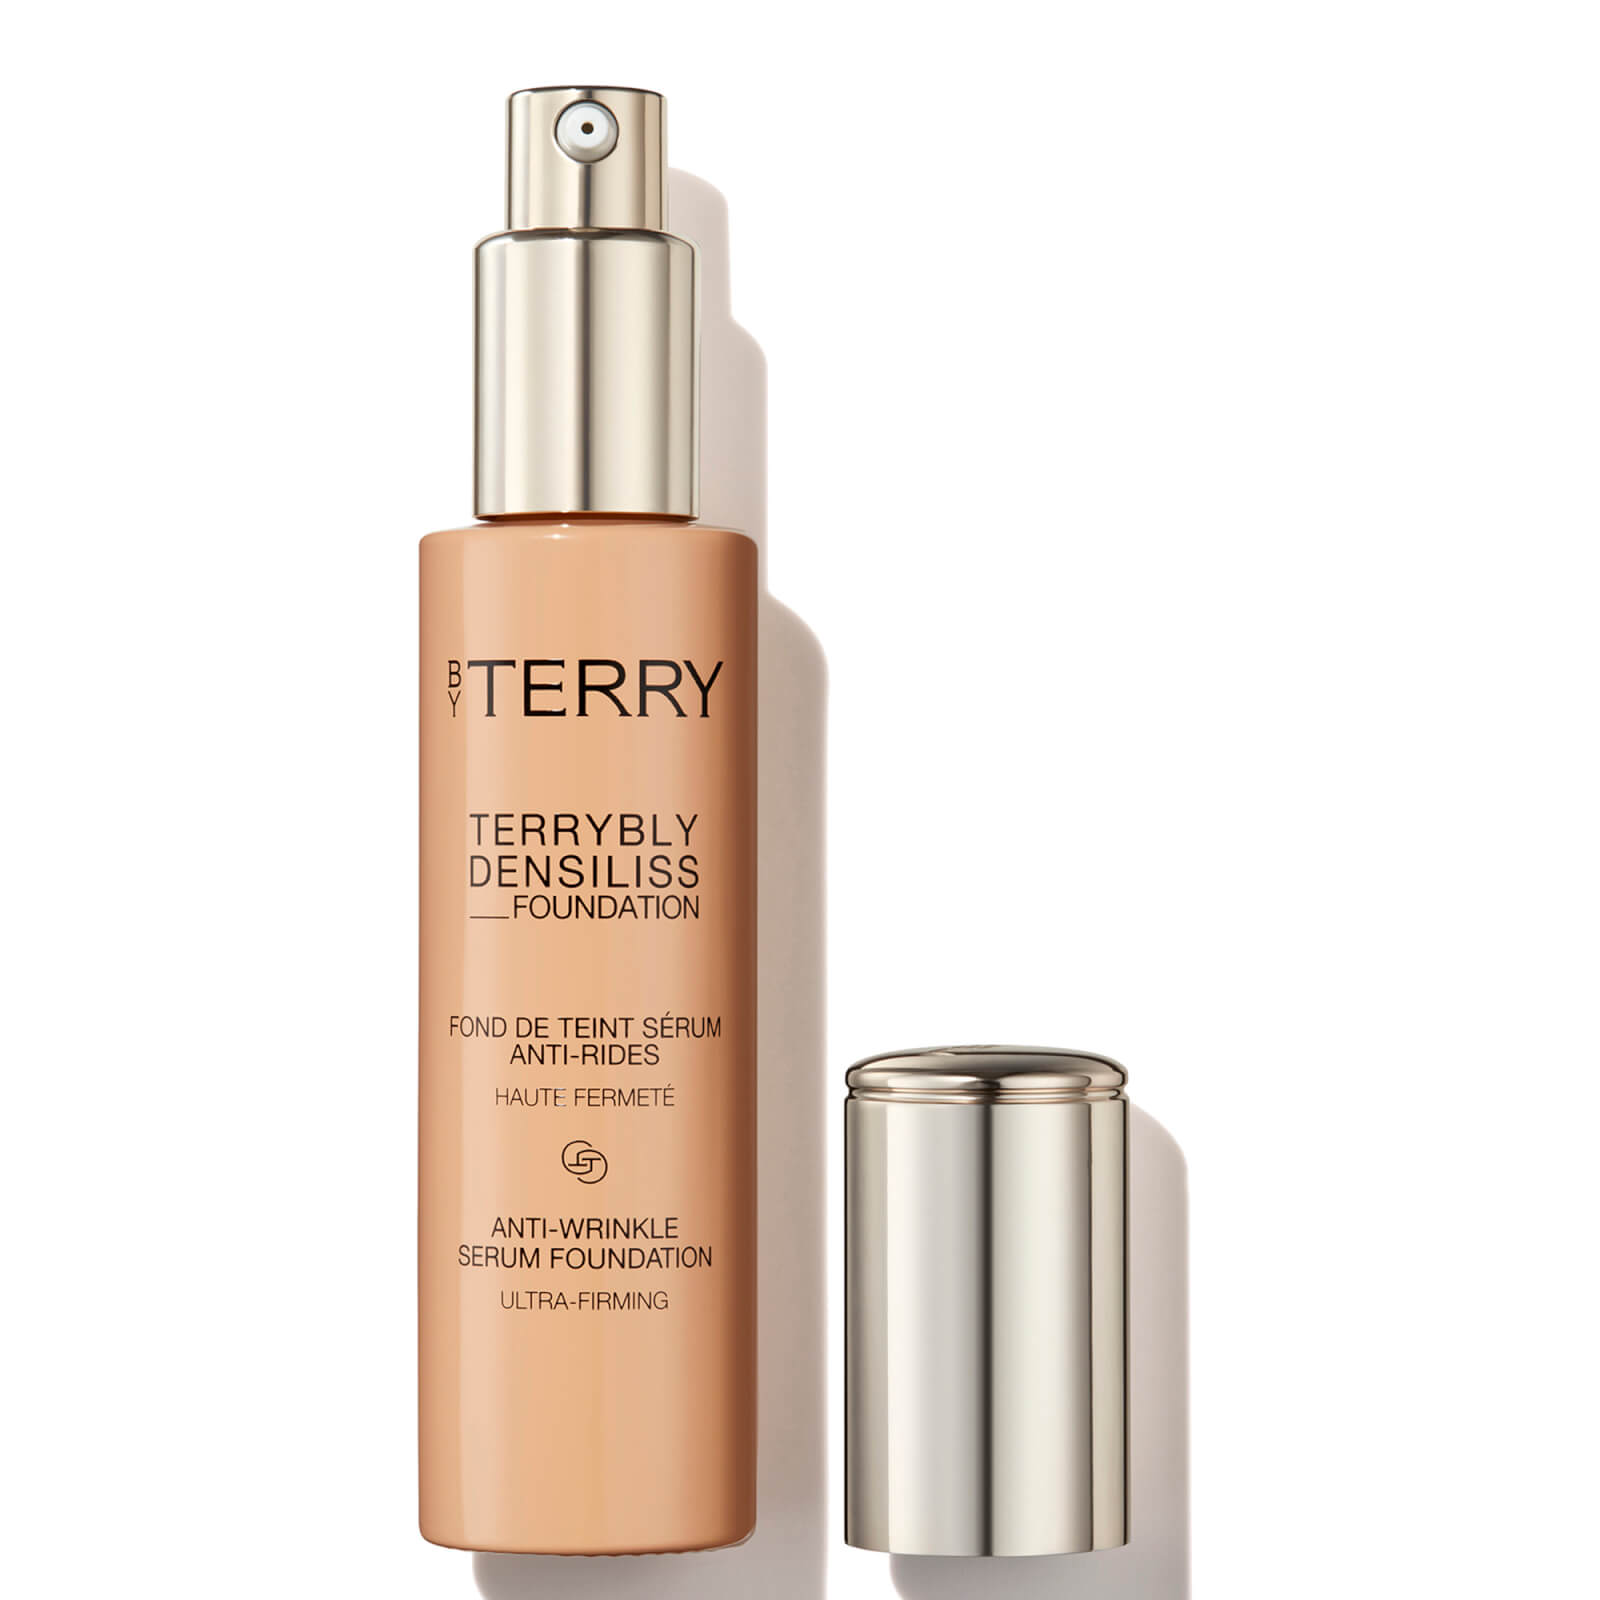 Photos - Foundation & Concealer By Terry Terrybly Densiliss Foundation 30ml  - 7. Golden B (Various Shades)